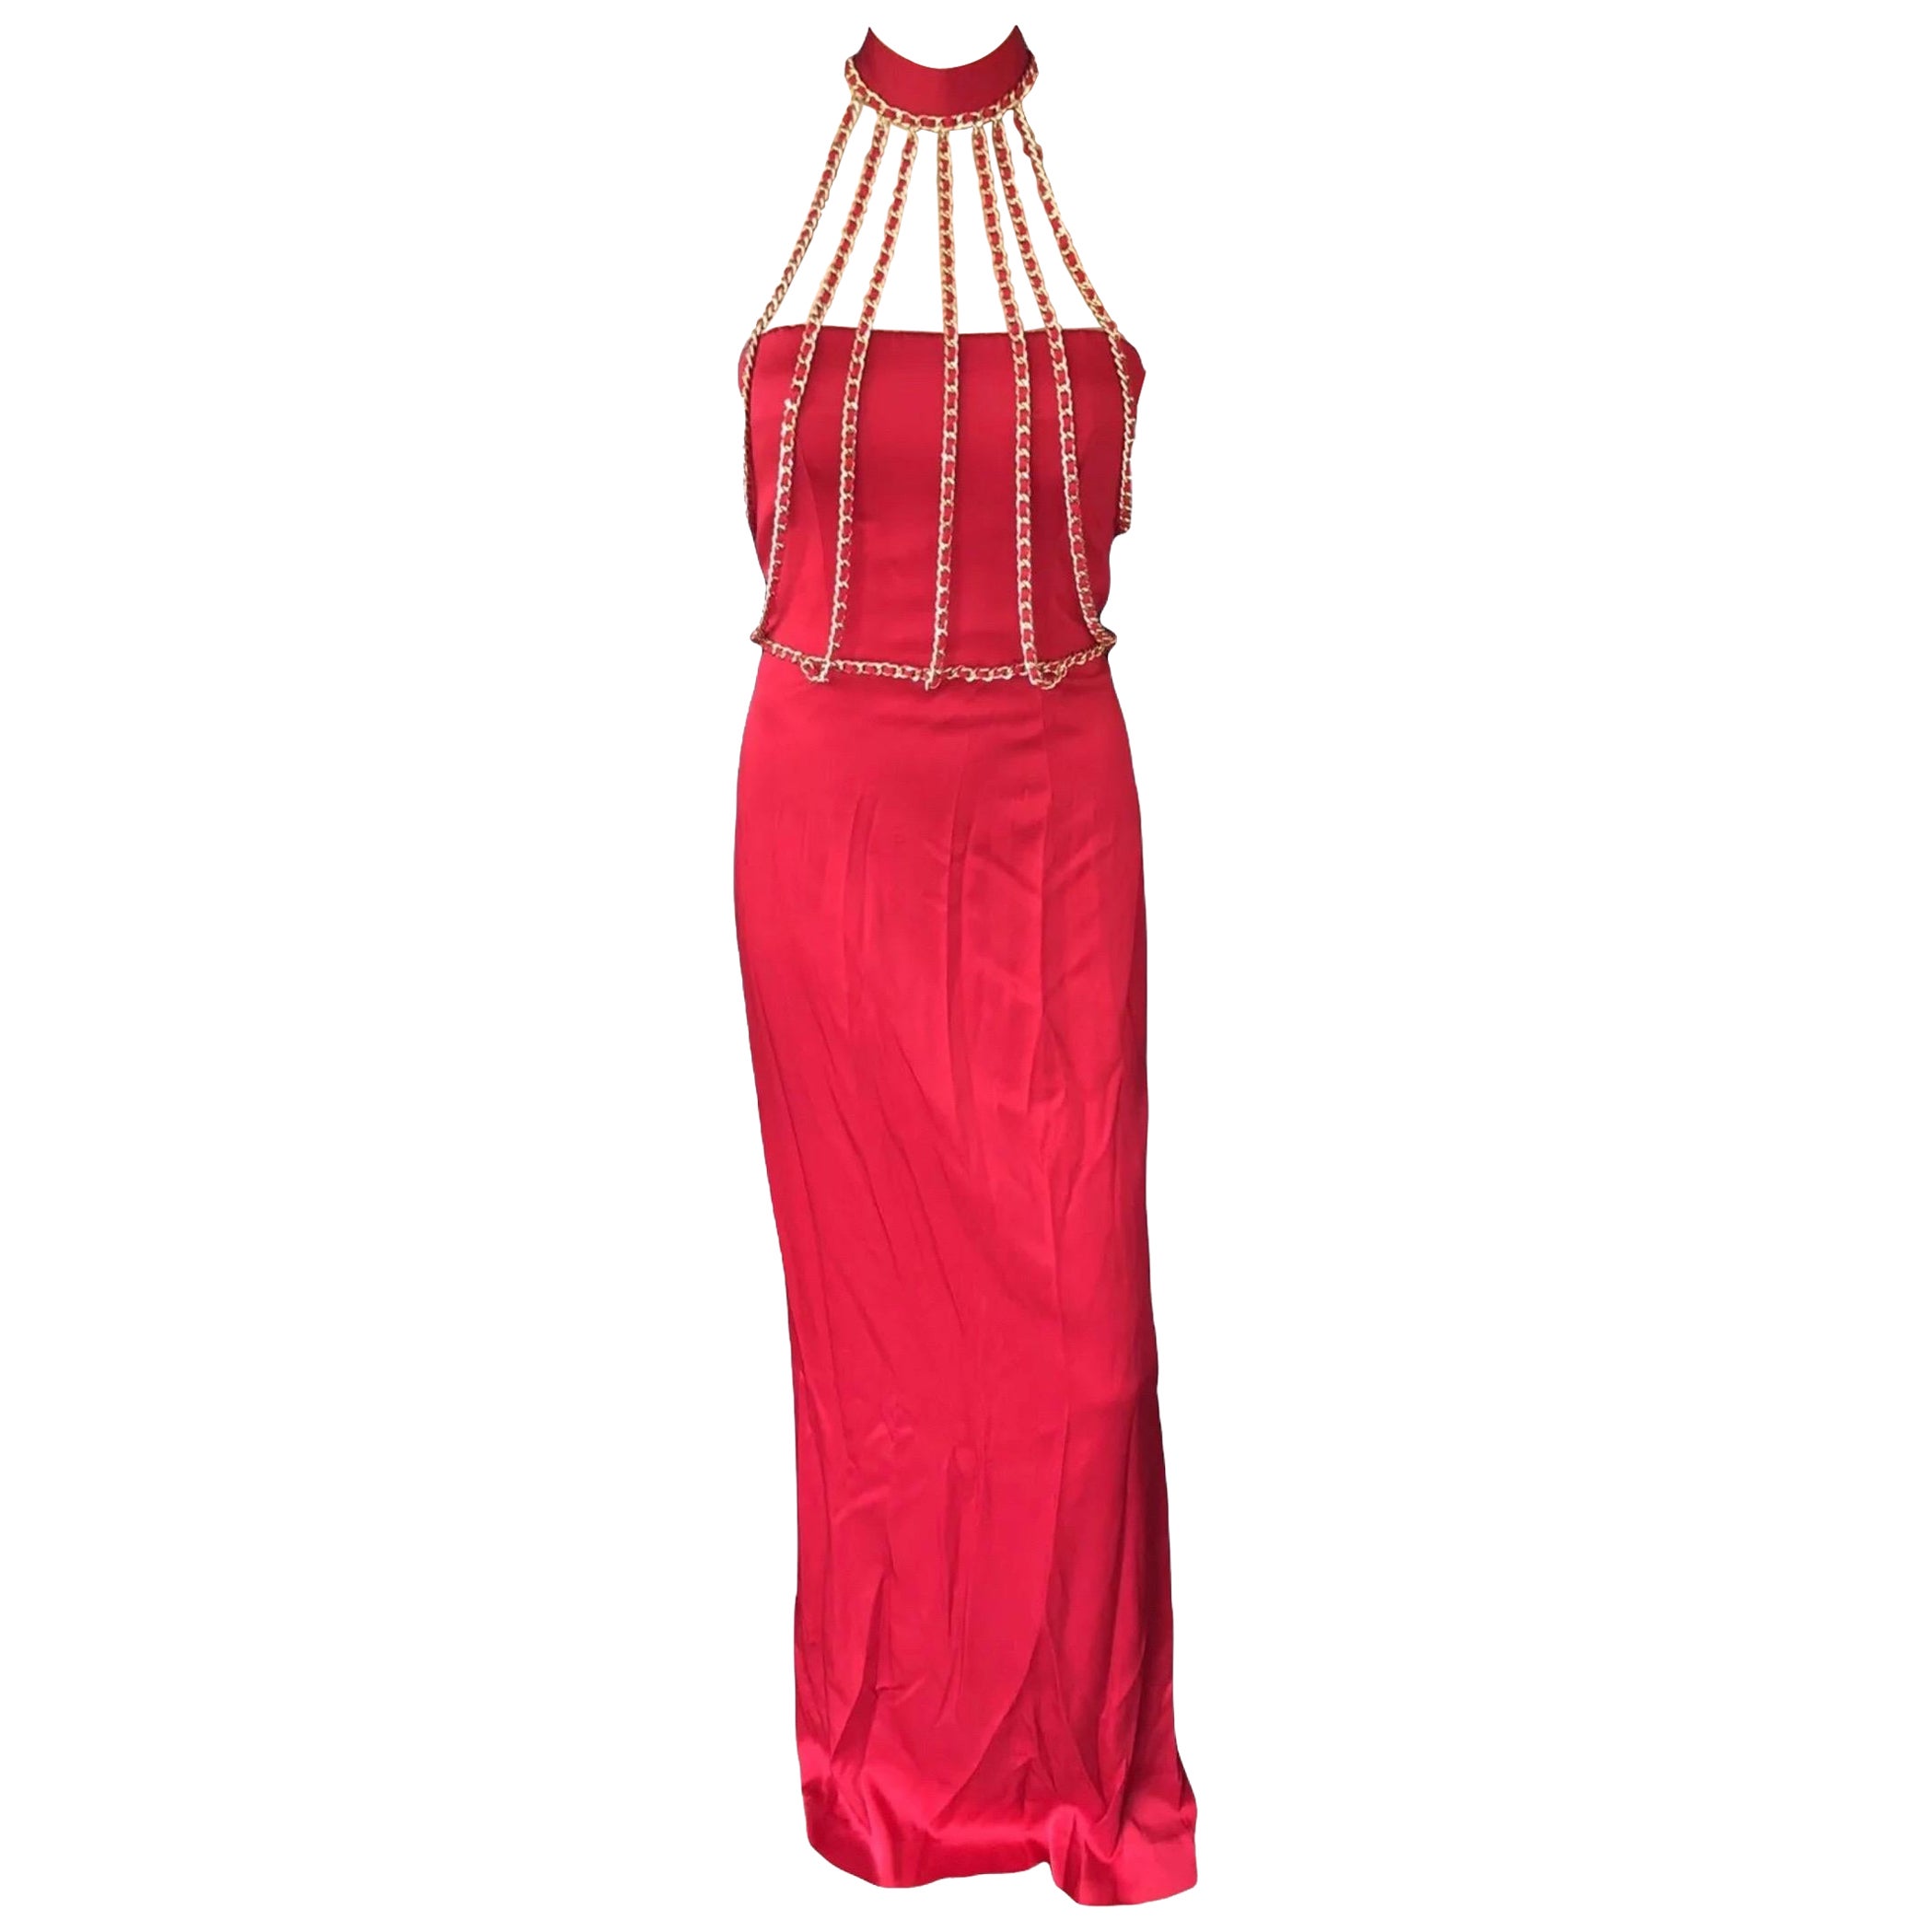 Moschino Couture Chain Harness Embellished Red Evening Dress Gown  For Sale